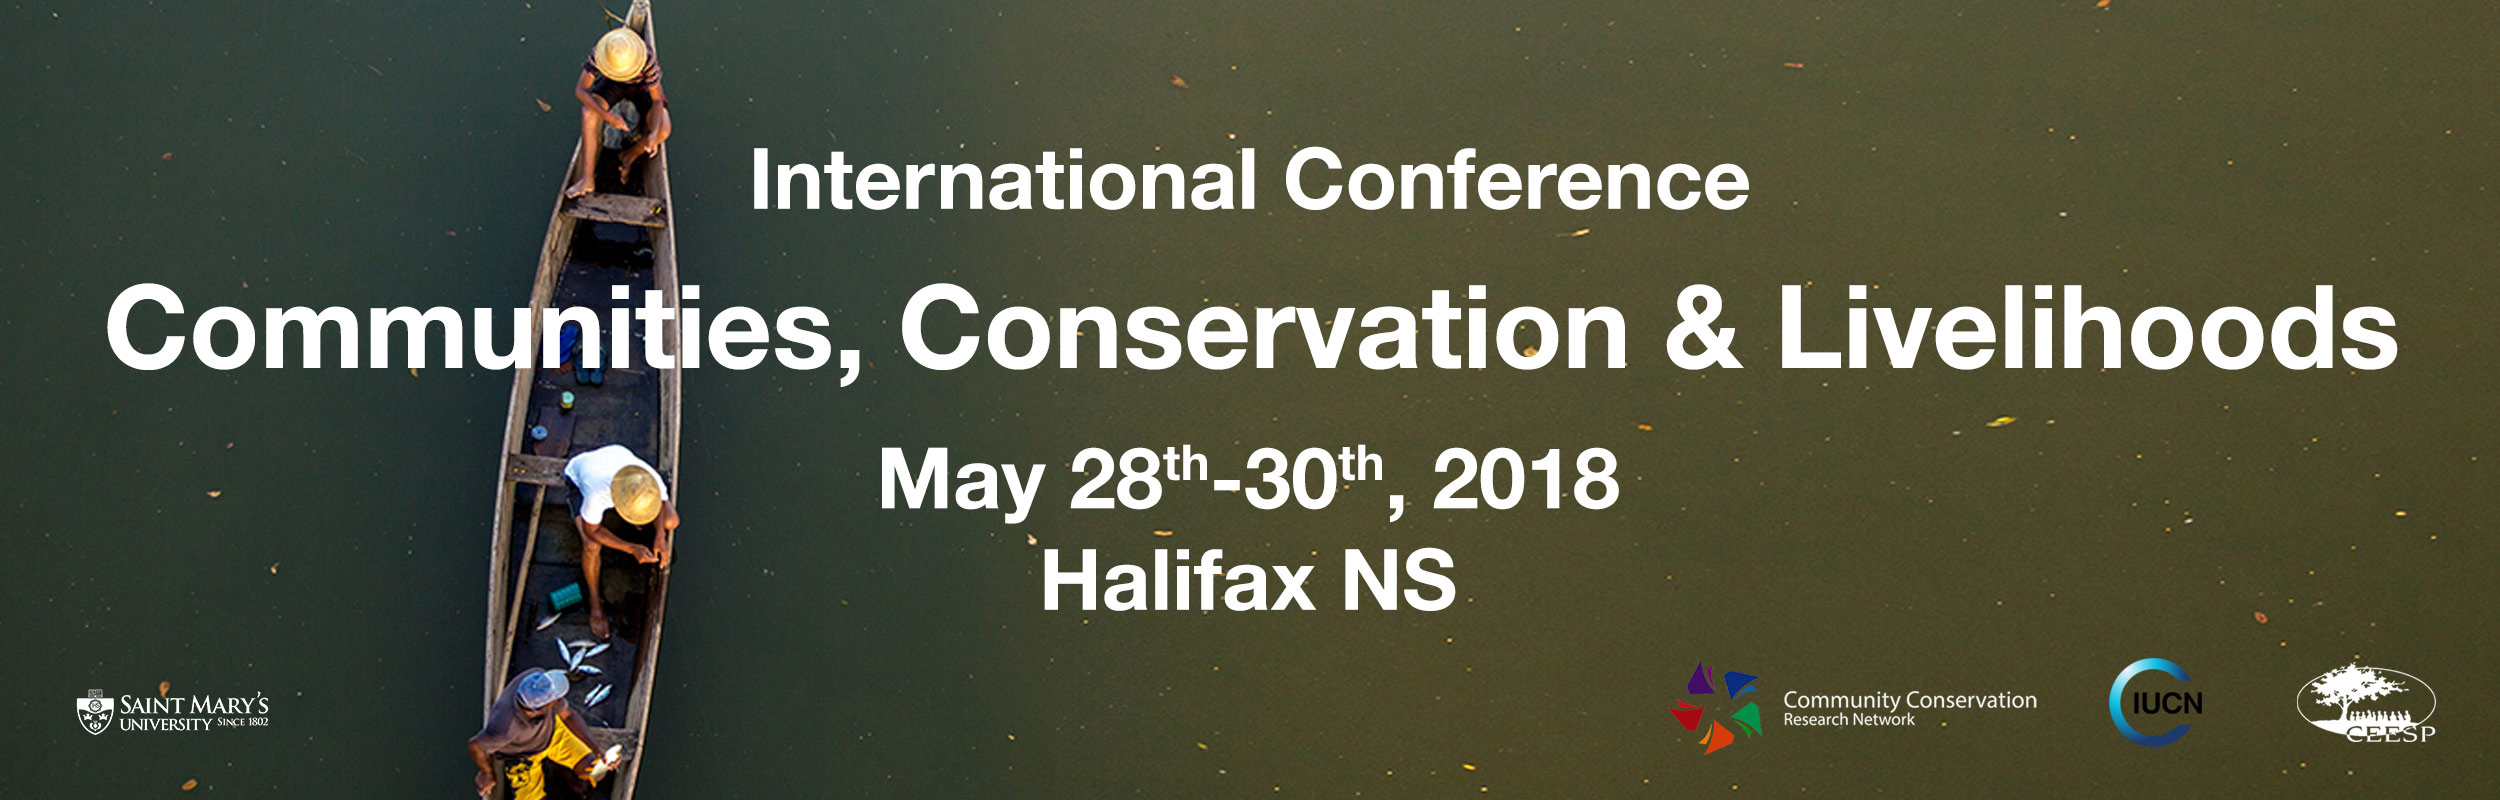 CCRN Conference in Halifax NS May 2018, Communities, Conservation & Livelihoods